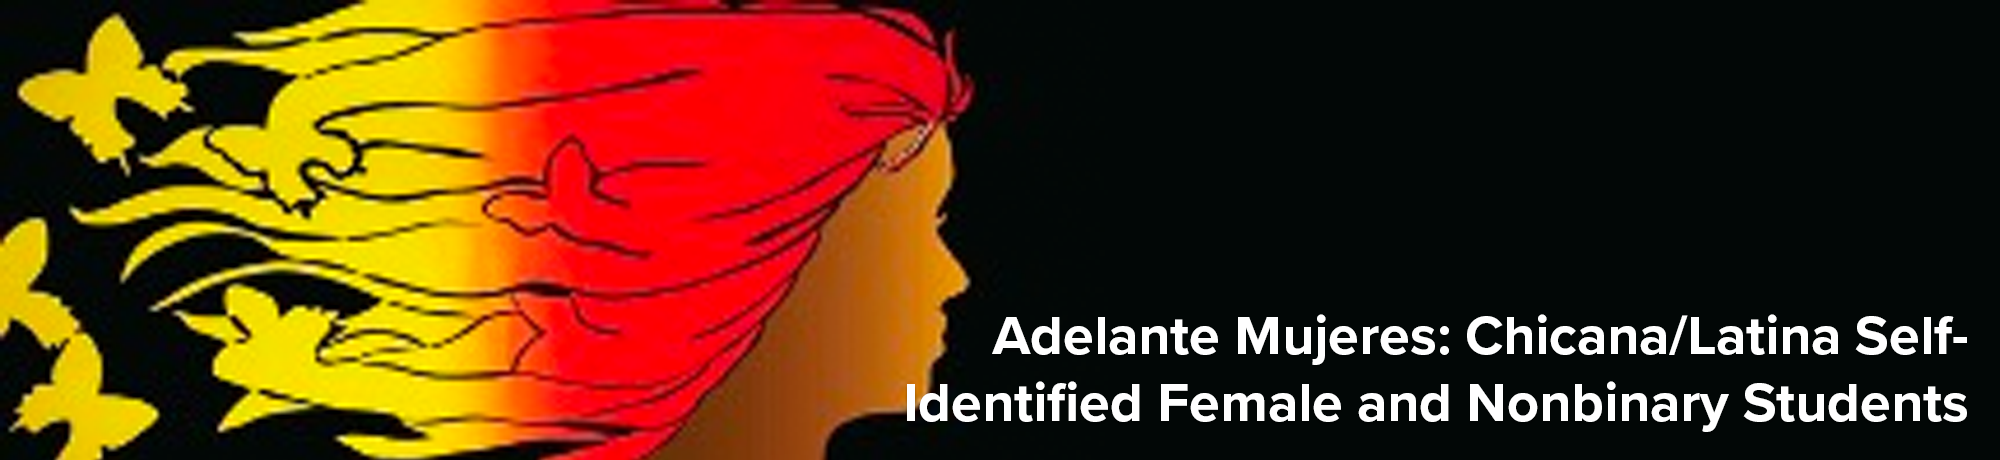 Adelante Mujeres: Chicana/Latina Self-Identified Female and Nonbinary Students